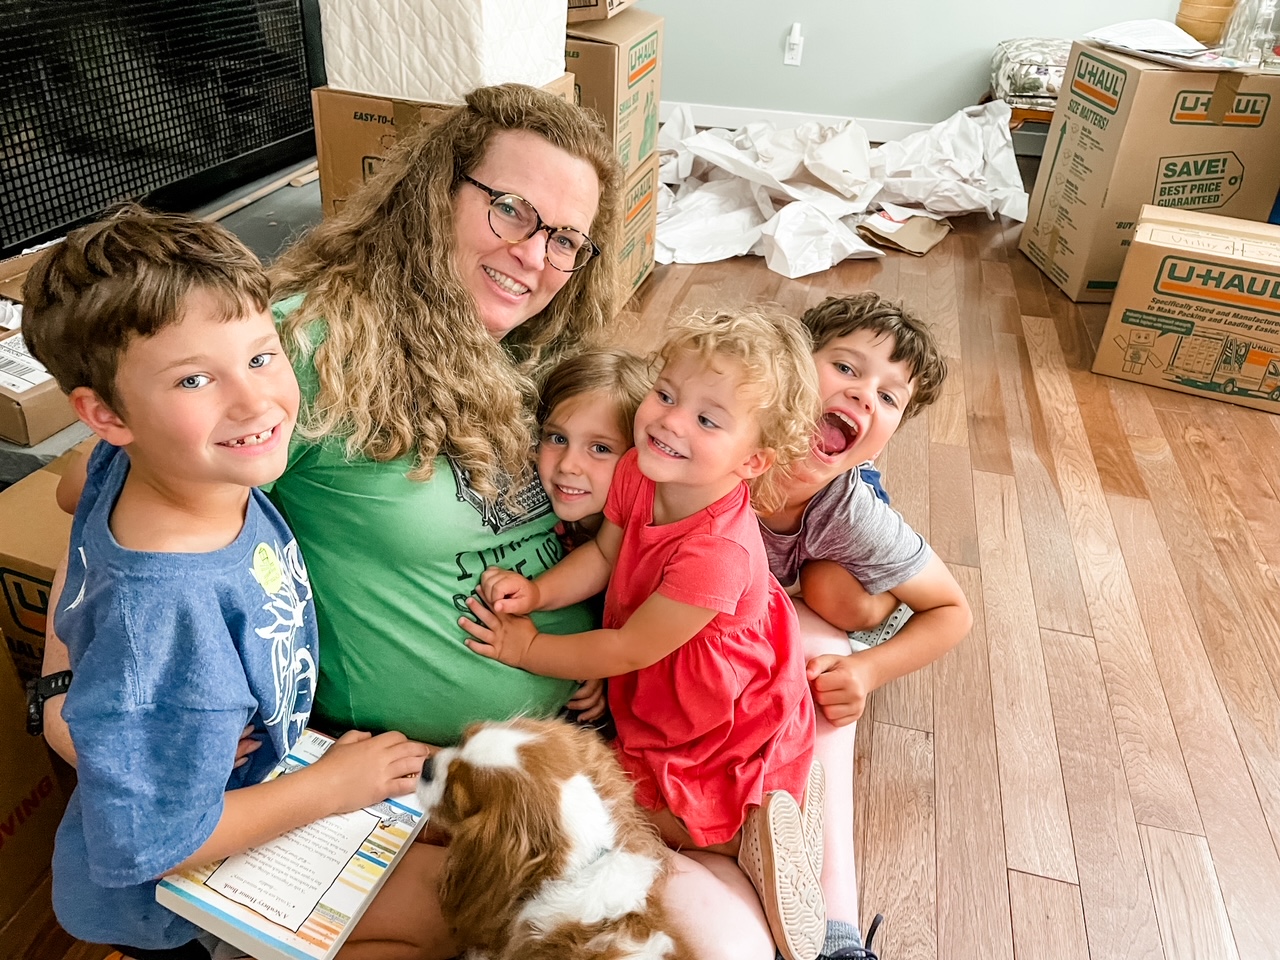 Marie and her four grandchildren posed together among moving boxes